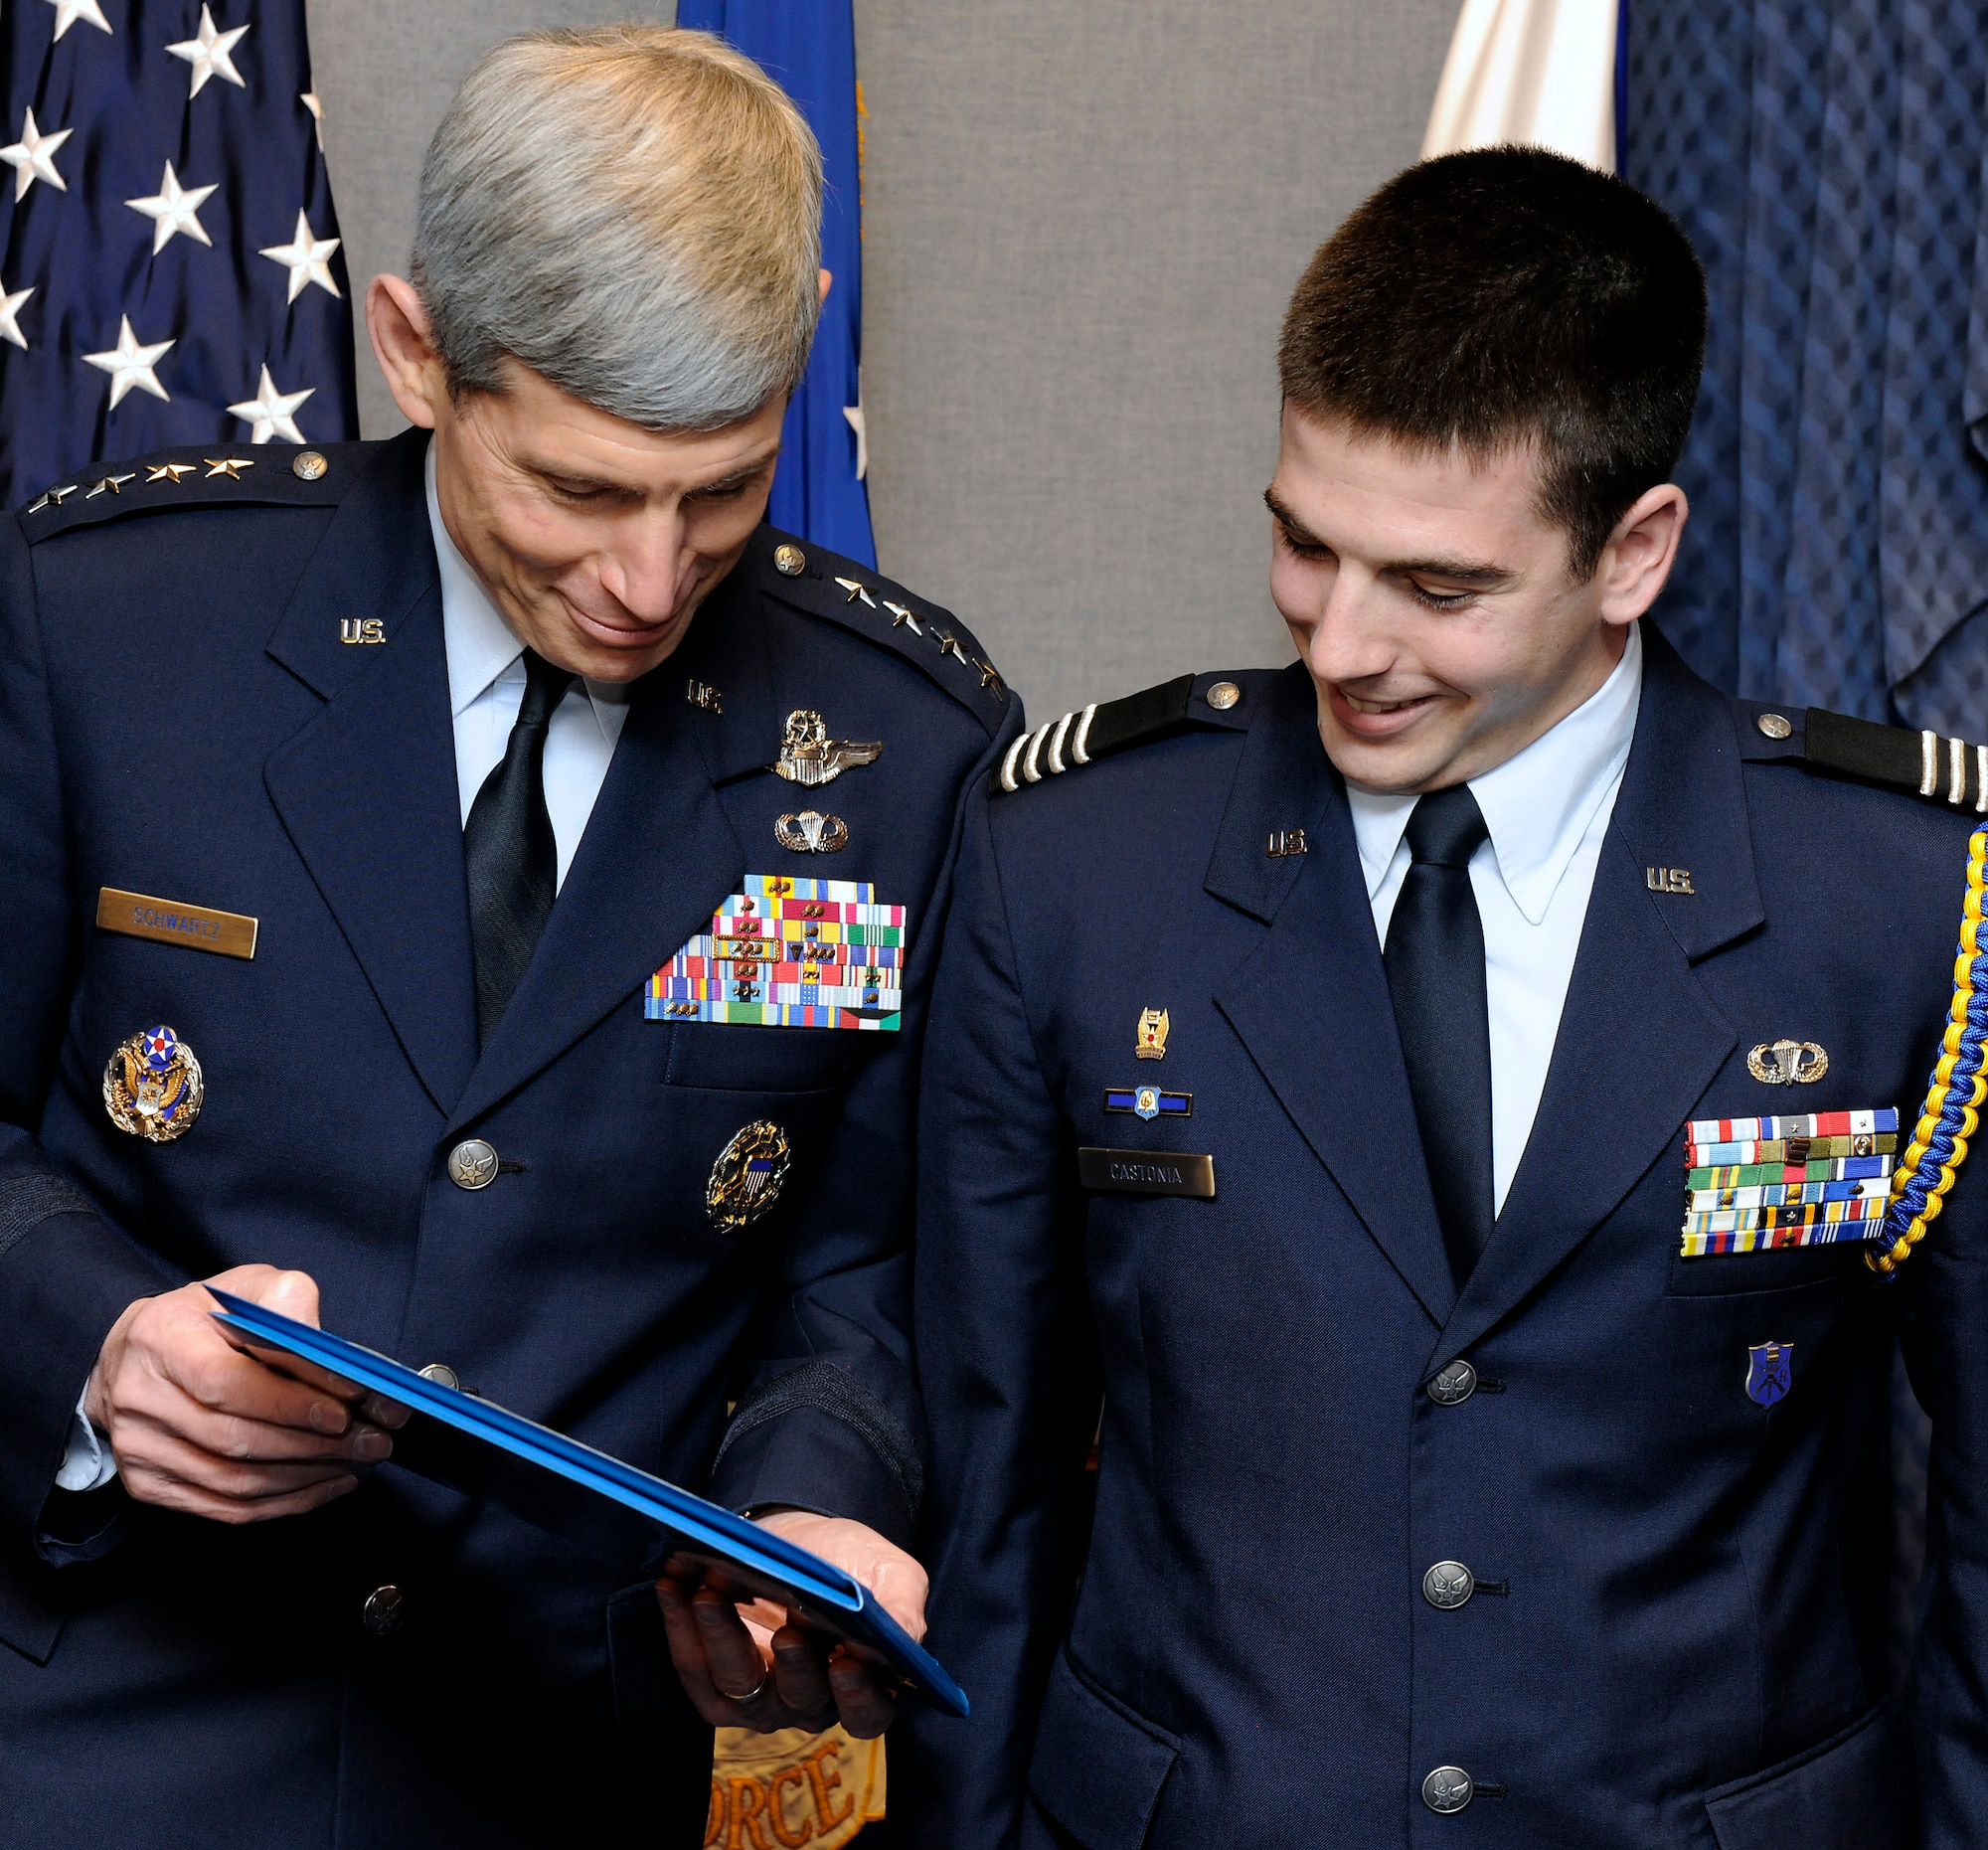 1st Lt. Ryan Castonia’s name is displayed alongside other Cadet of the Year recipients on the Air Squadron Millennium Sword's display case in the Pentagon. Selected as the Cadet of the Year for 2009, he met with Chief of Staff of the Air Force Gen. Norton Schwartz April 5, 2010, to receive the award. (U.S. Air Force photo/Scott M. Ash)